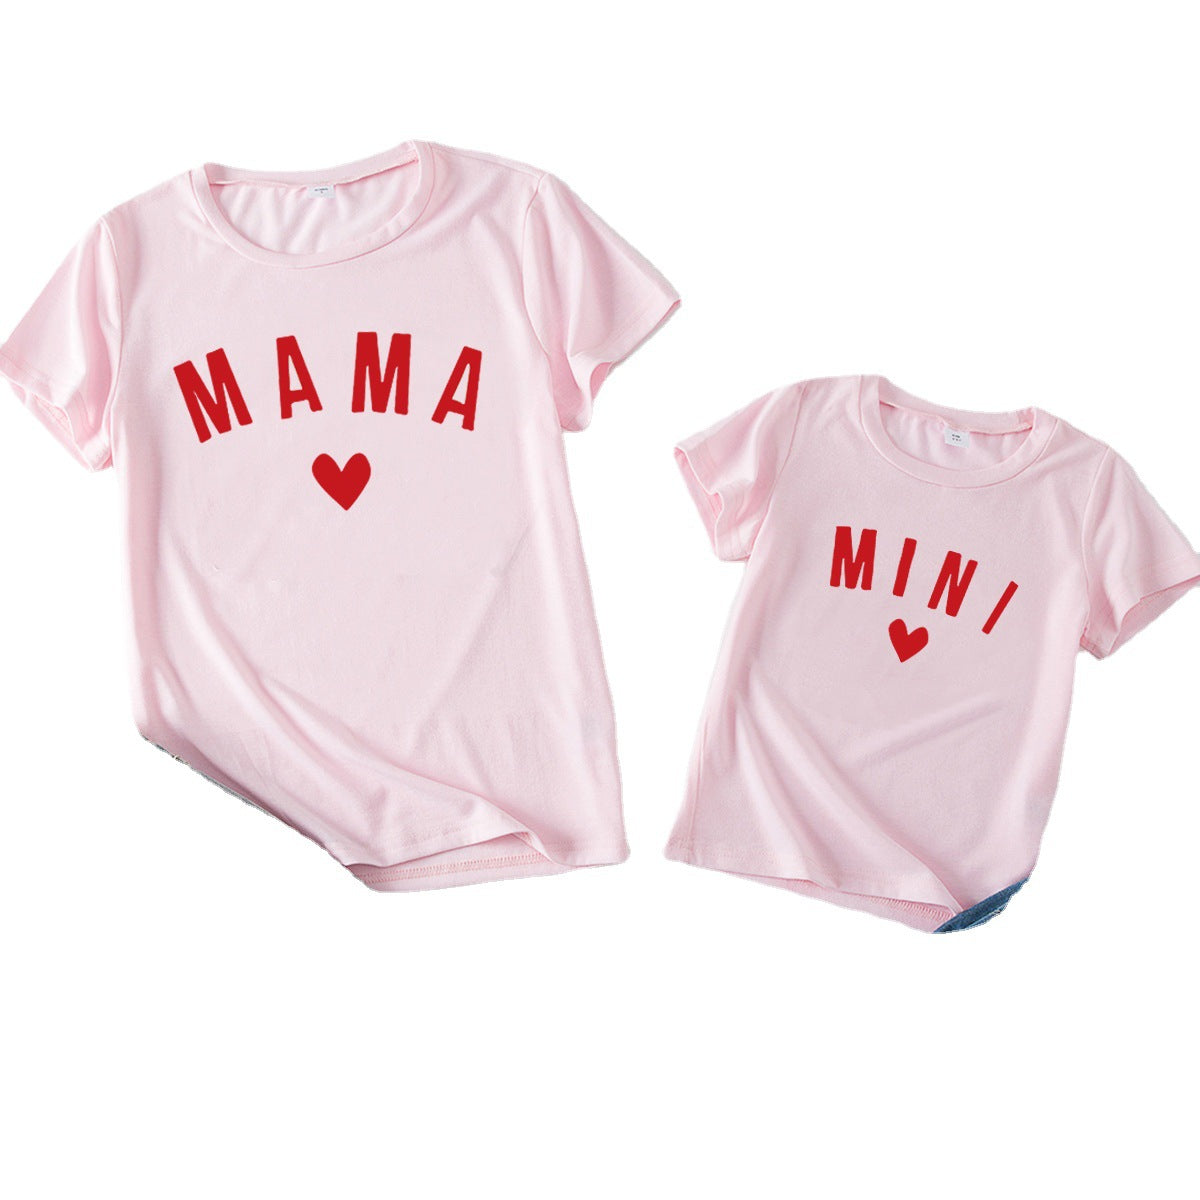 Mom And Me Letter Print Tops.